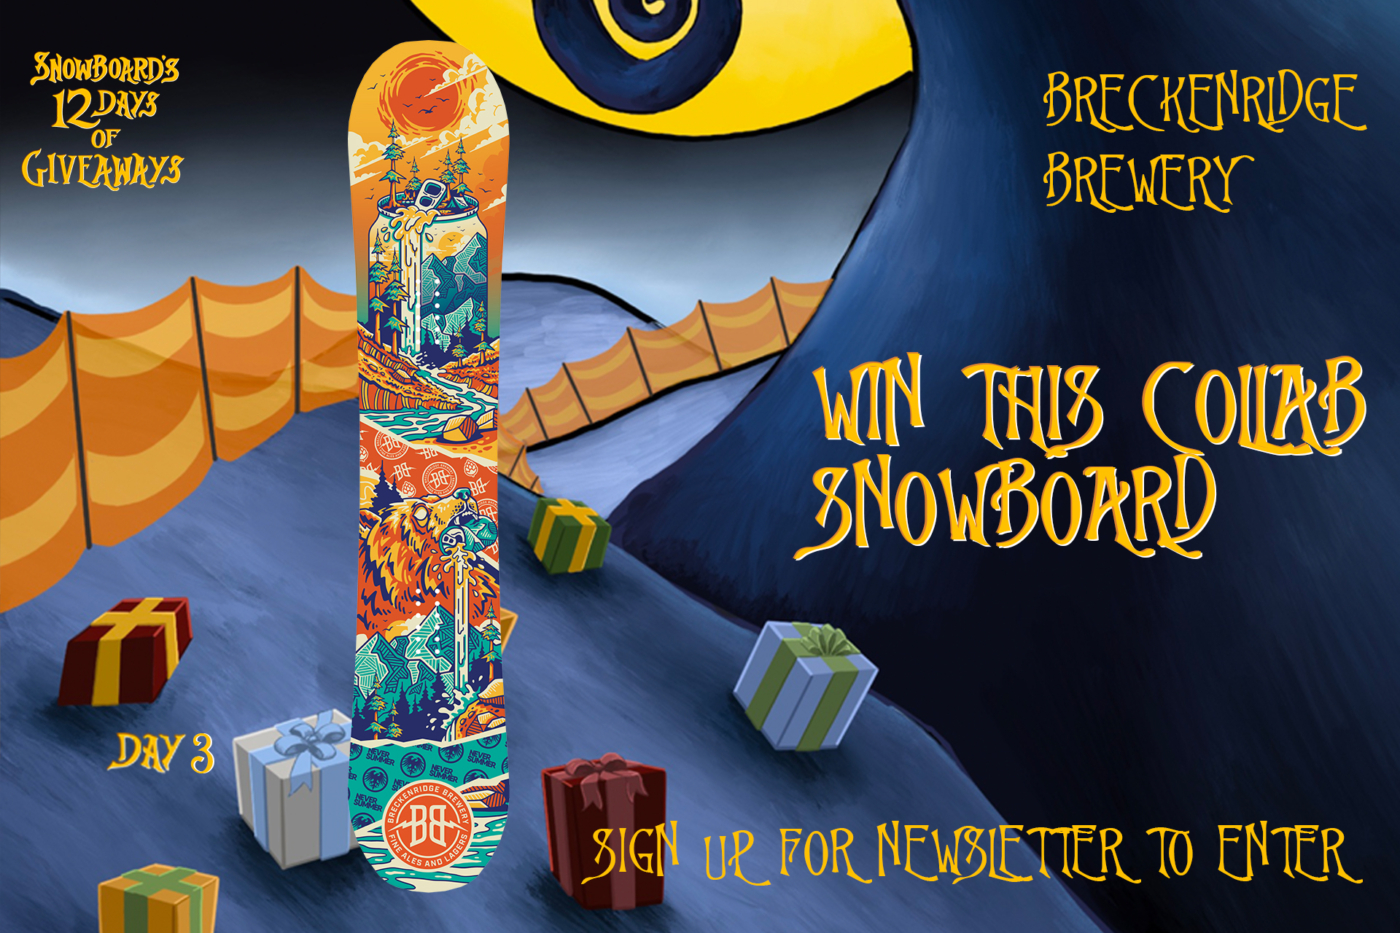 Breckendrige Brewery NEver Summer Snowboard Giveaway